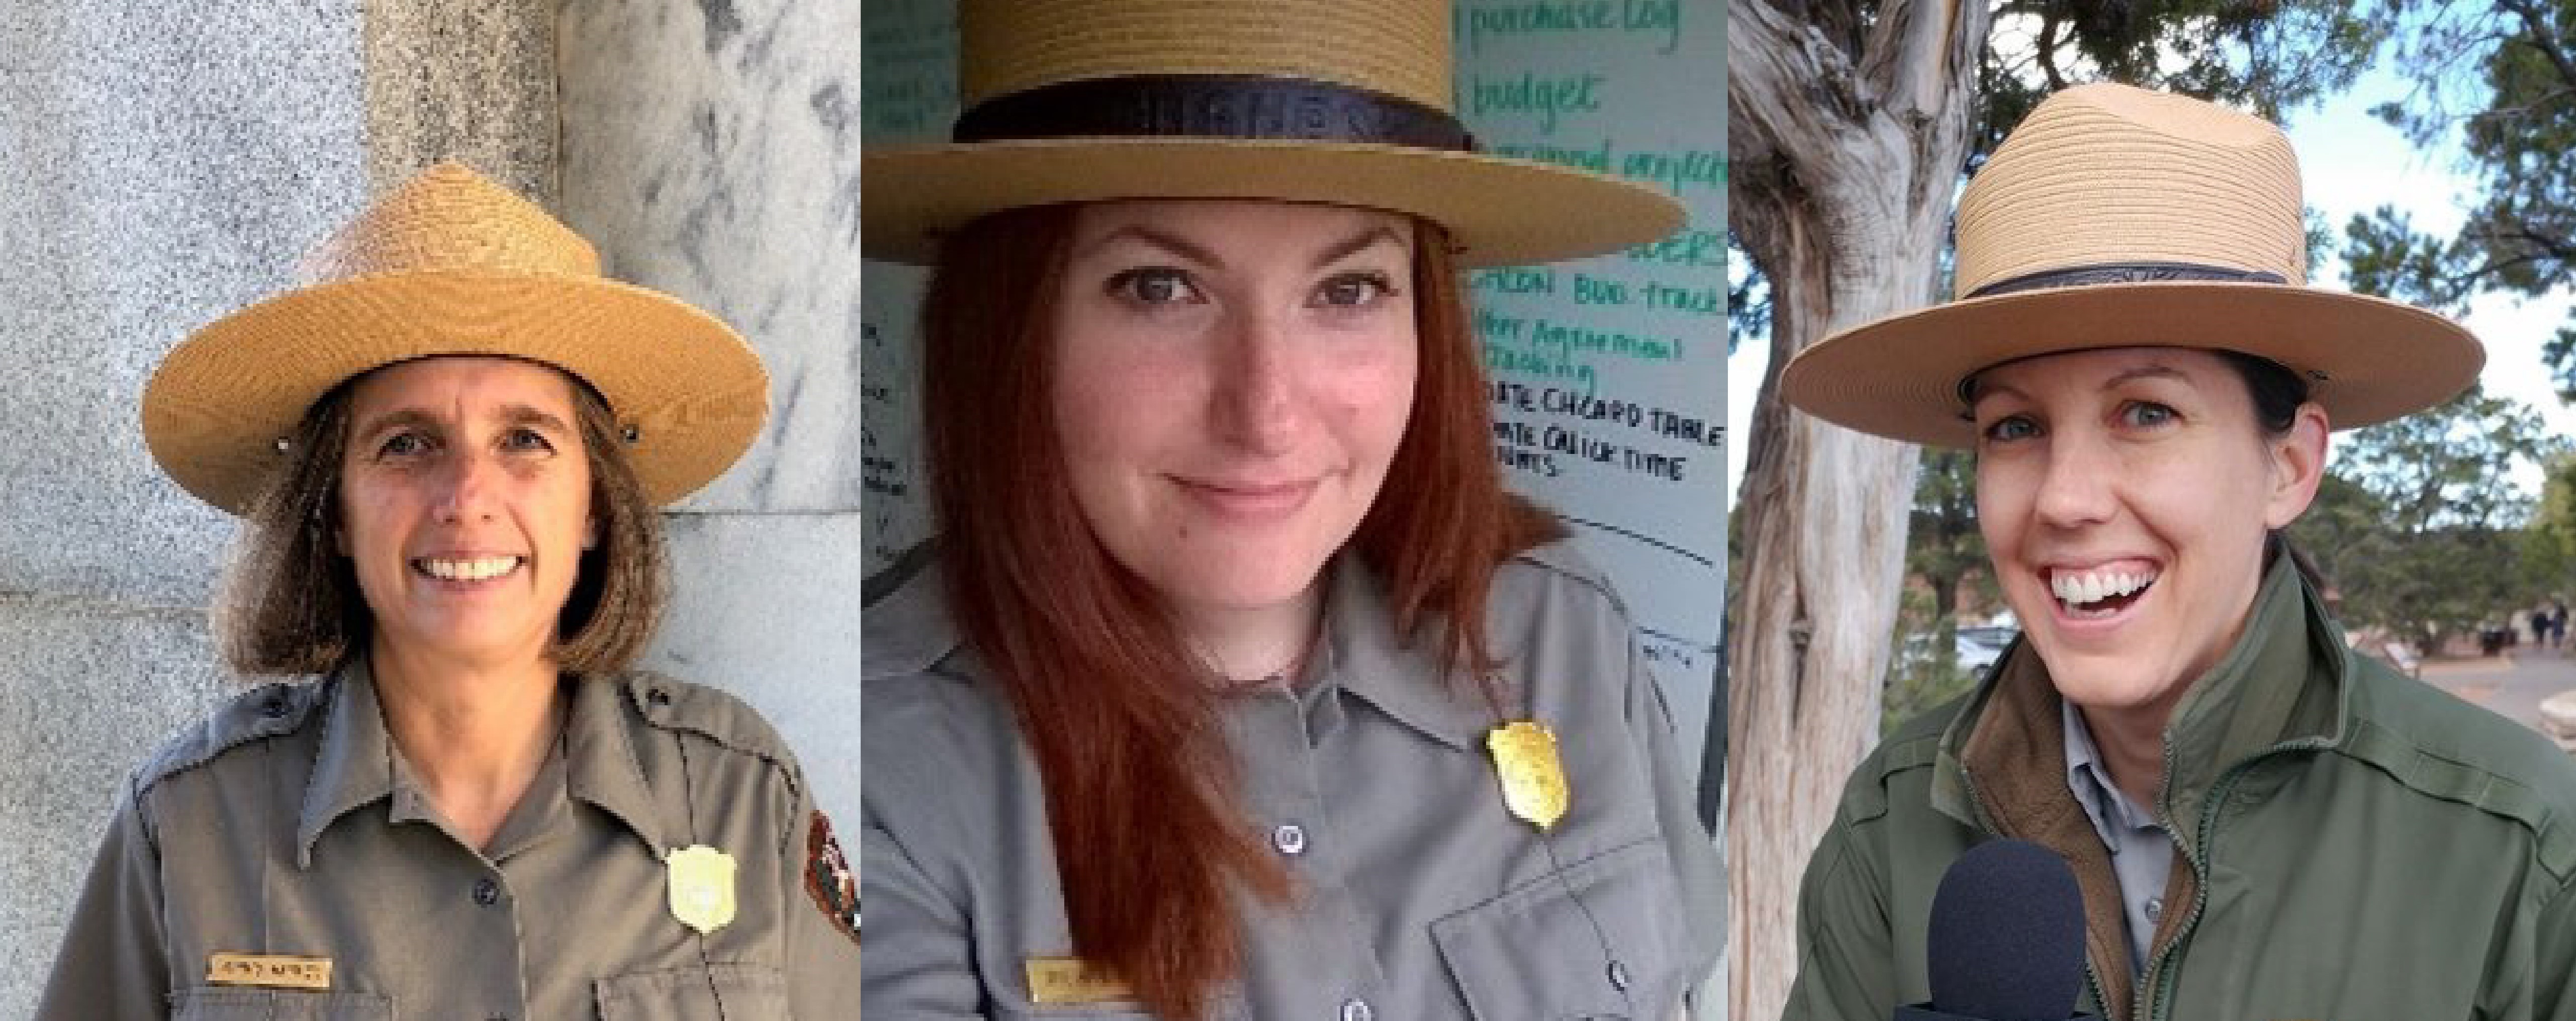 Three separate portrait shots of people side by side, each wearing a tan ranger hat and smiling.